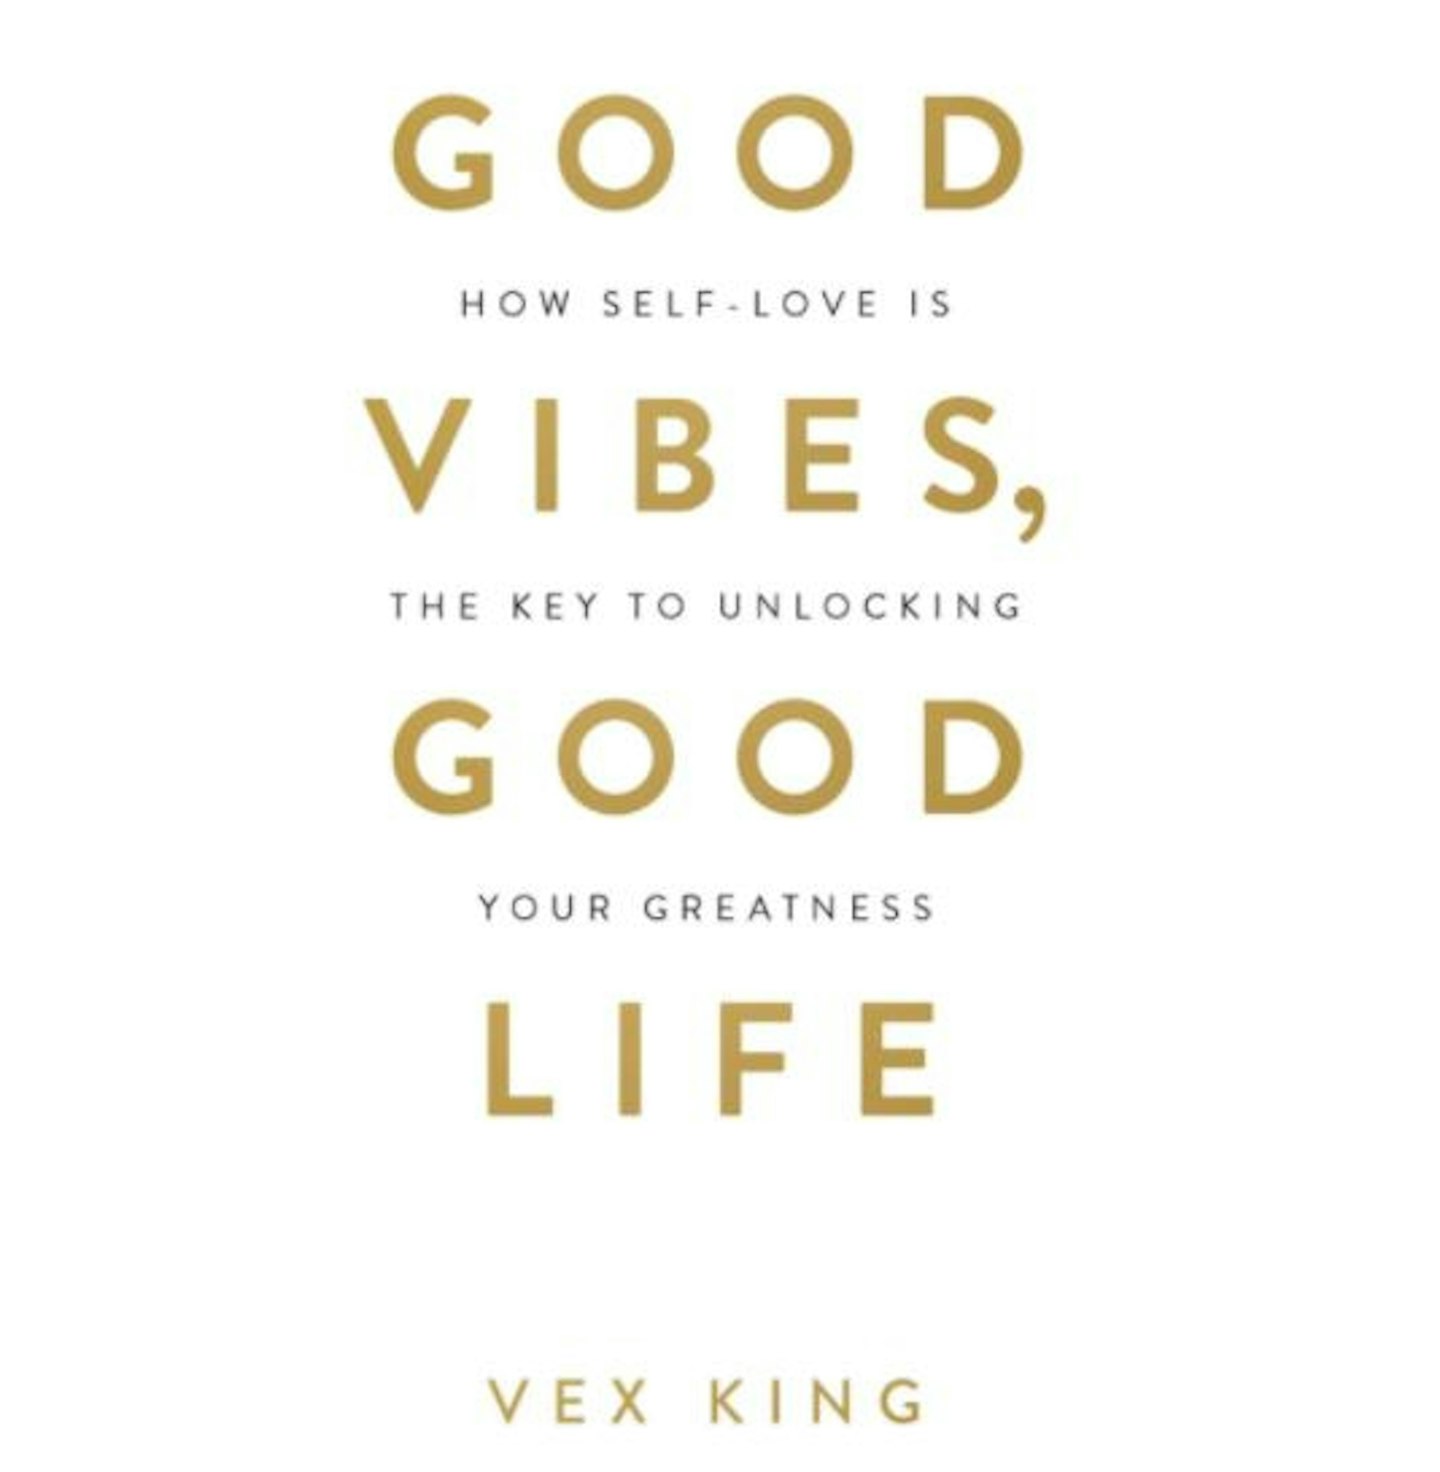 Good Vibes, Good Life: How Self-Love is the Key to Unlocking Your Greatness by Vex King